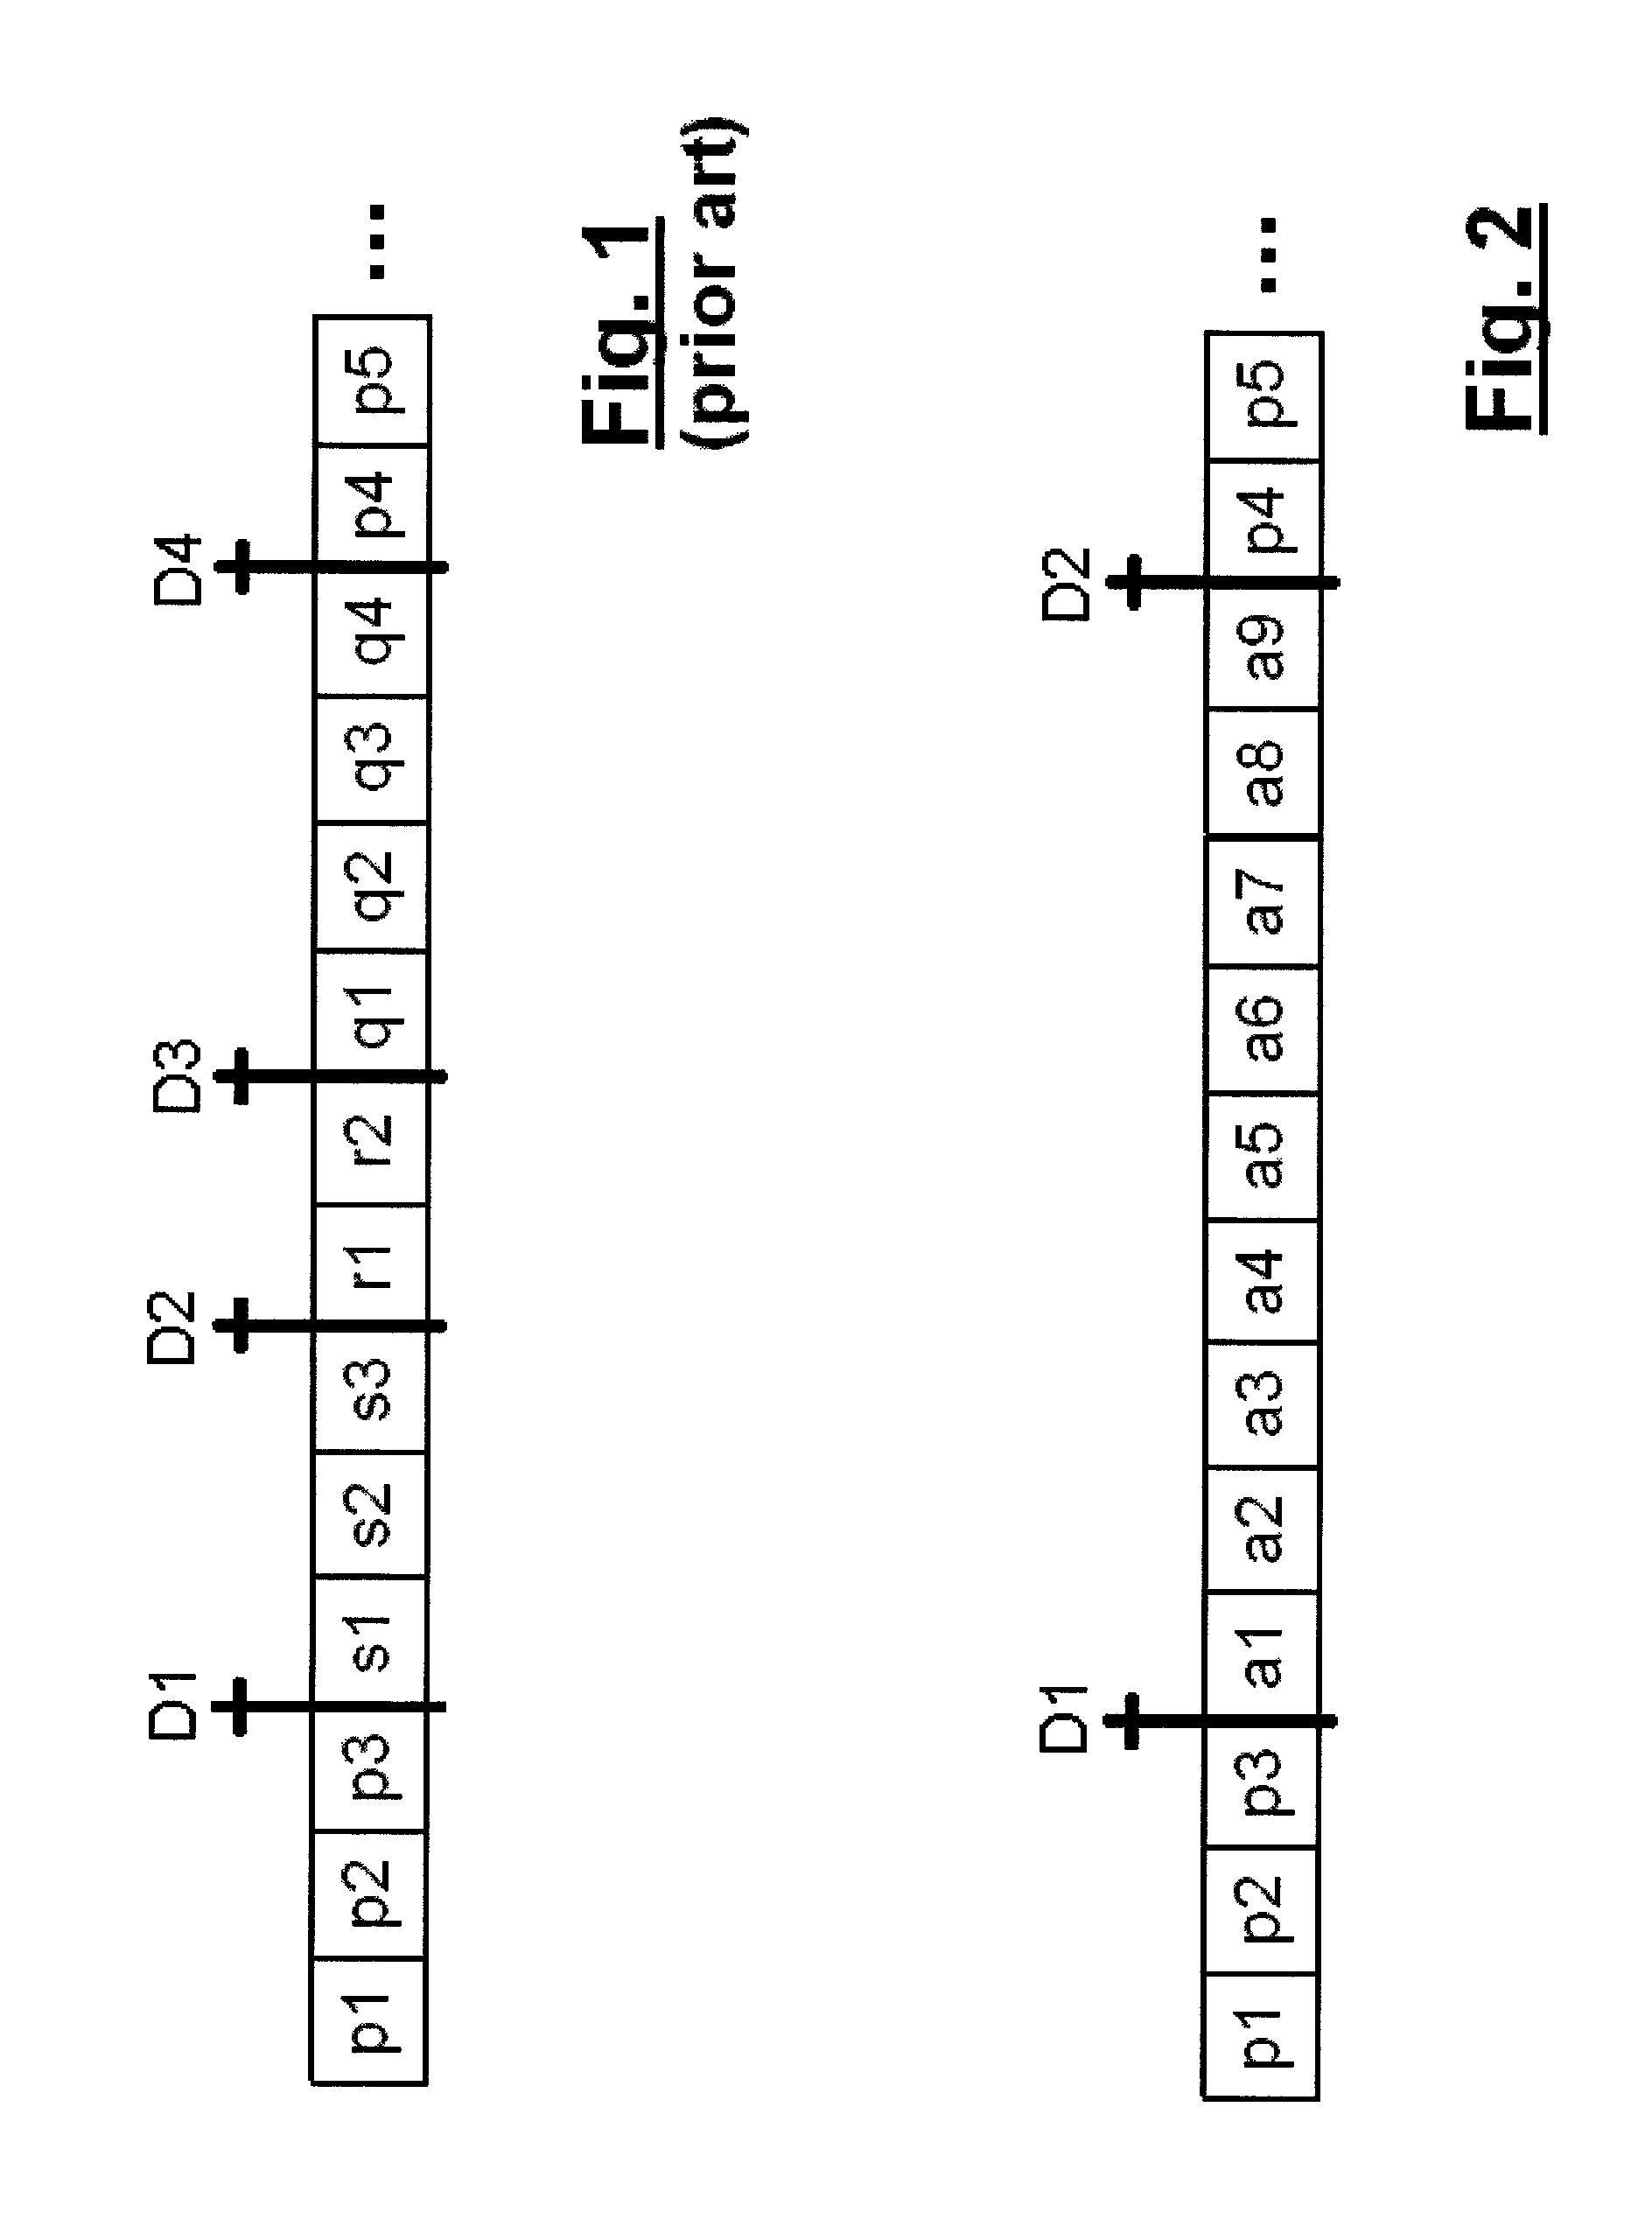 Method and system for dynamically selecting, assembling and inserting content into stream media